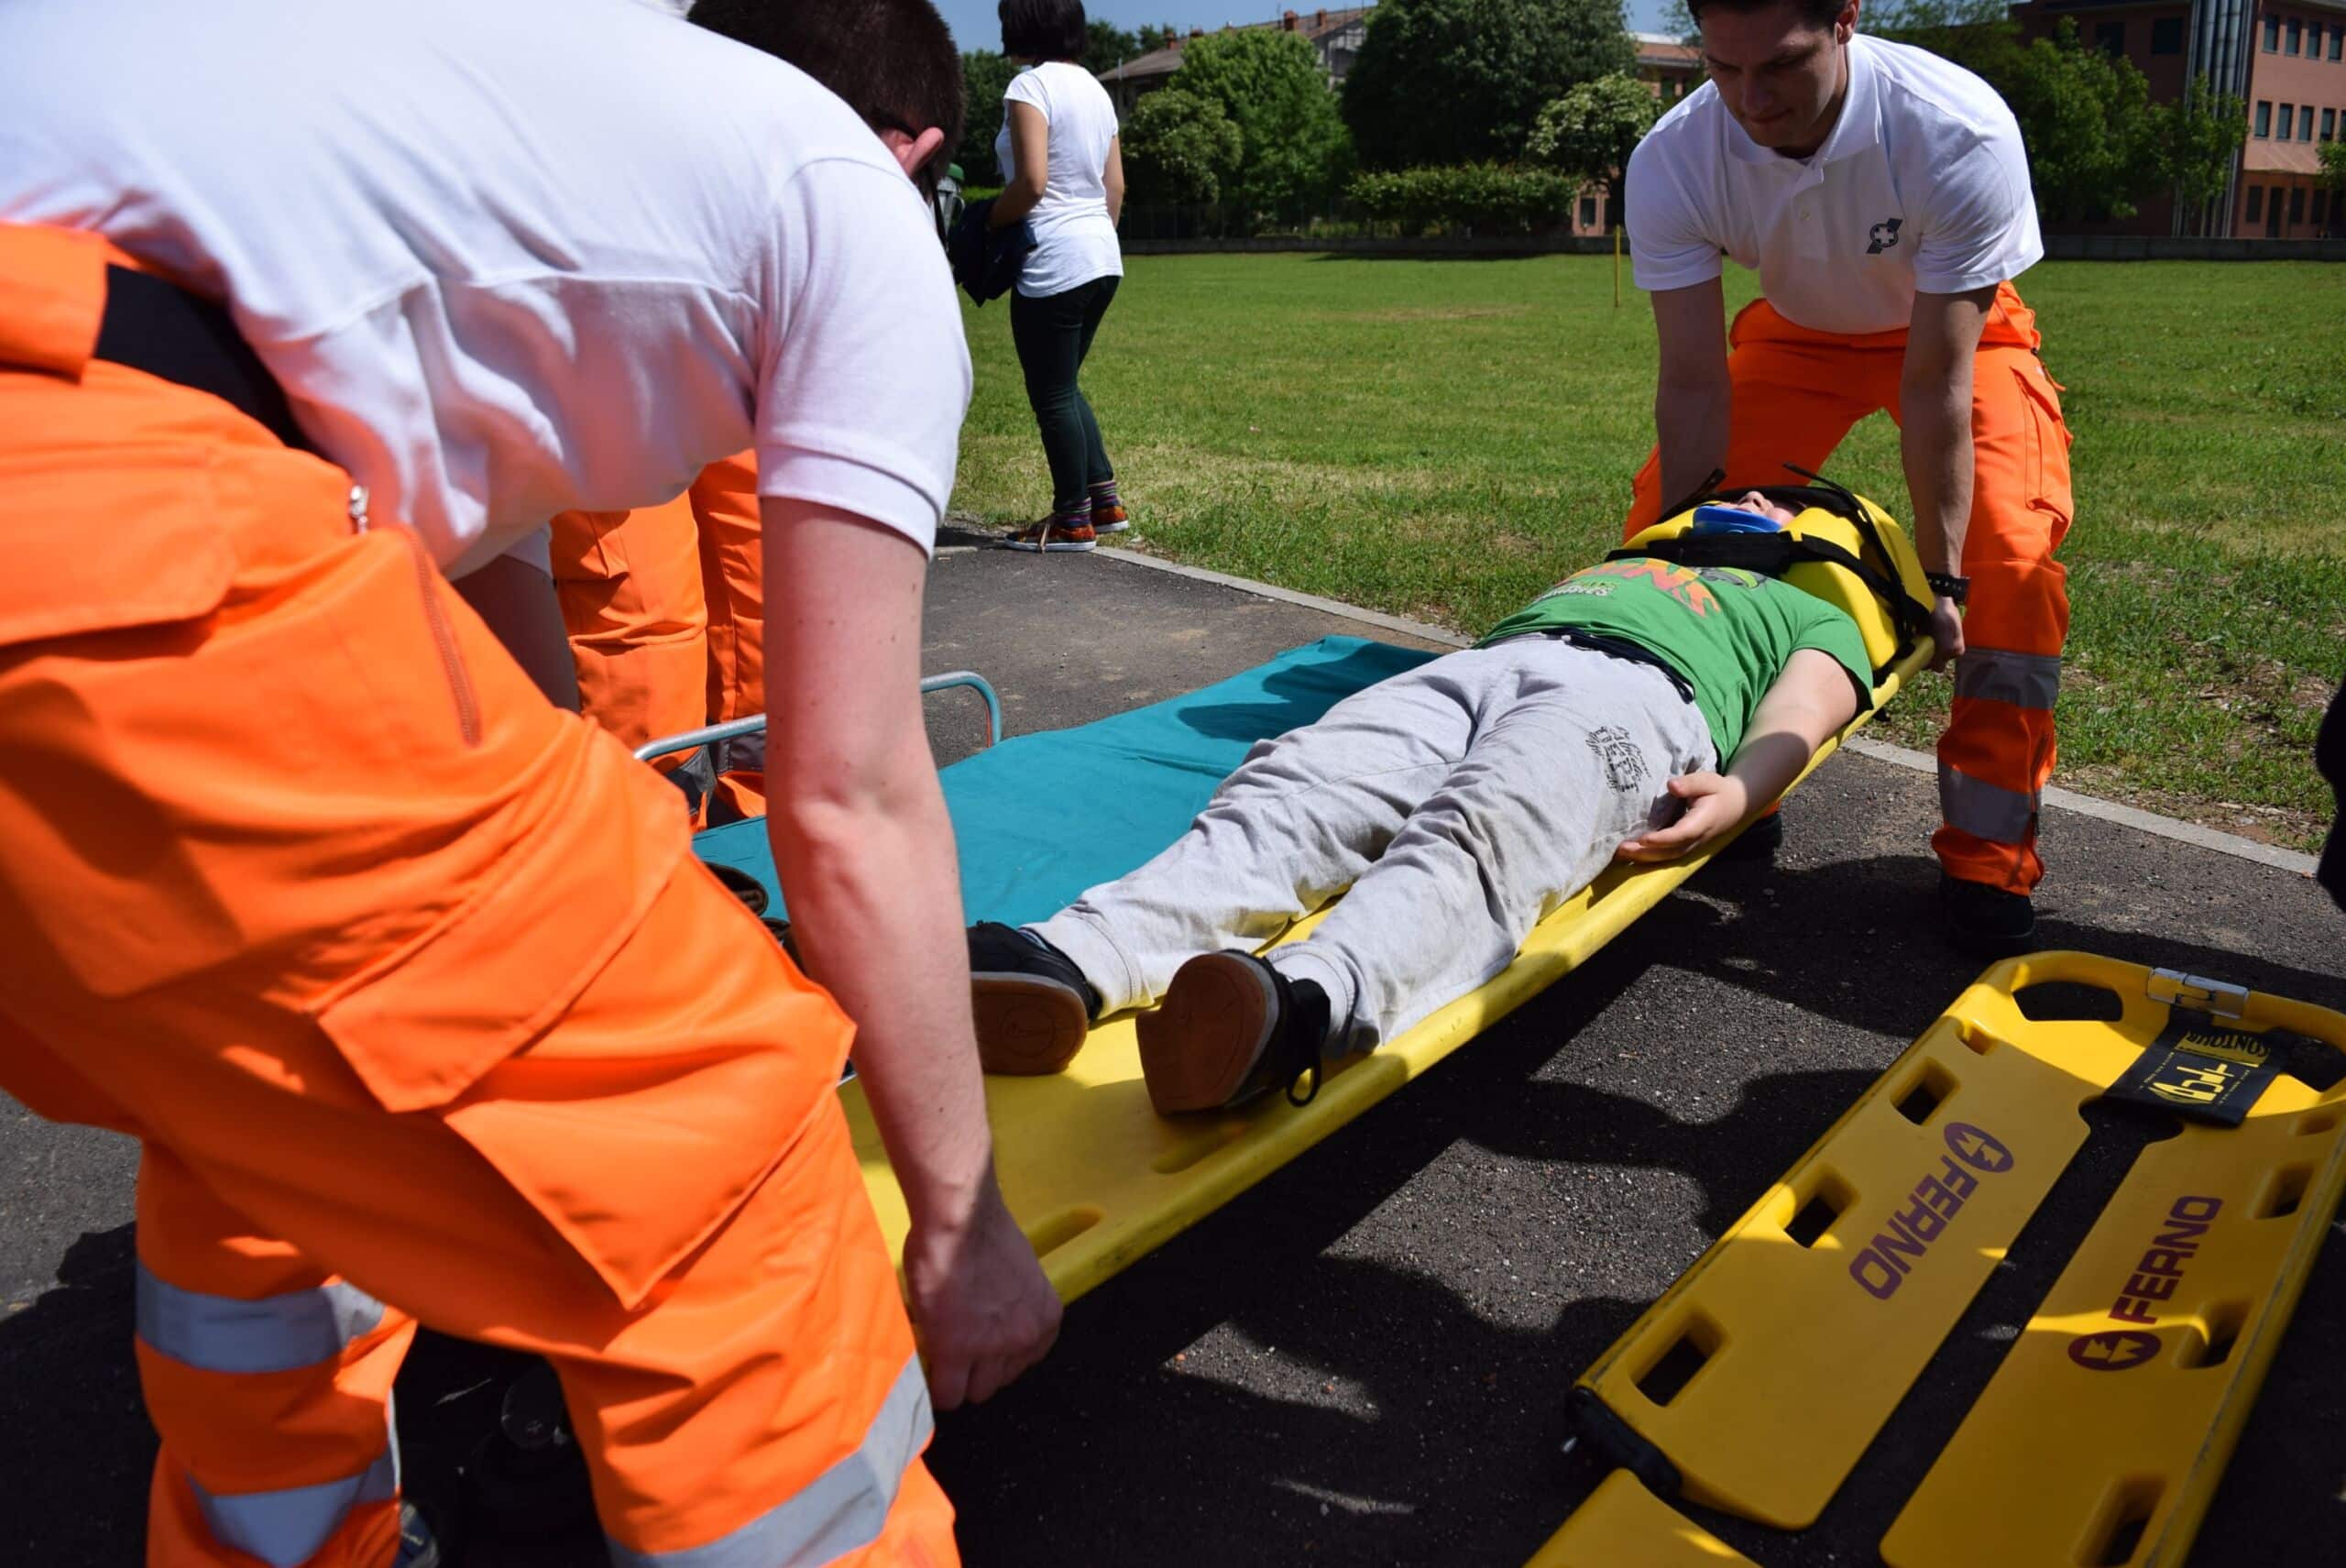 using a stretcher onboard